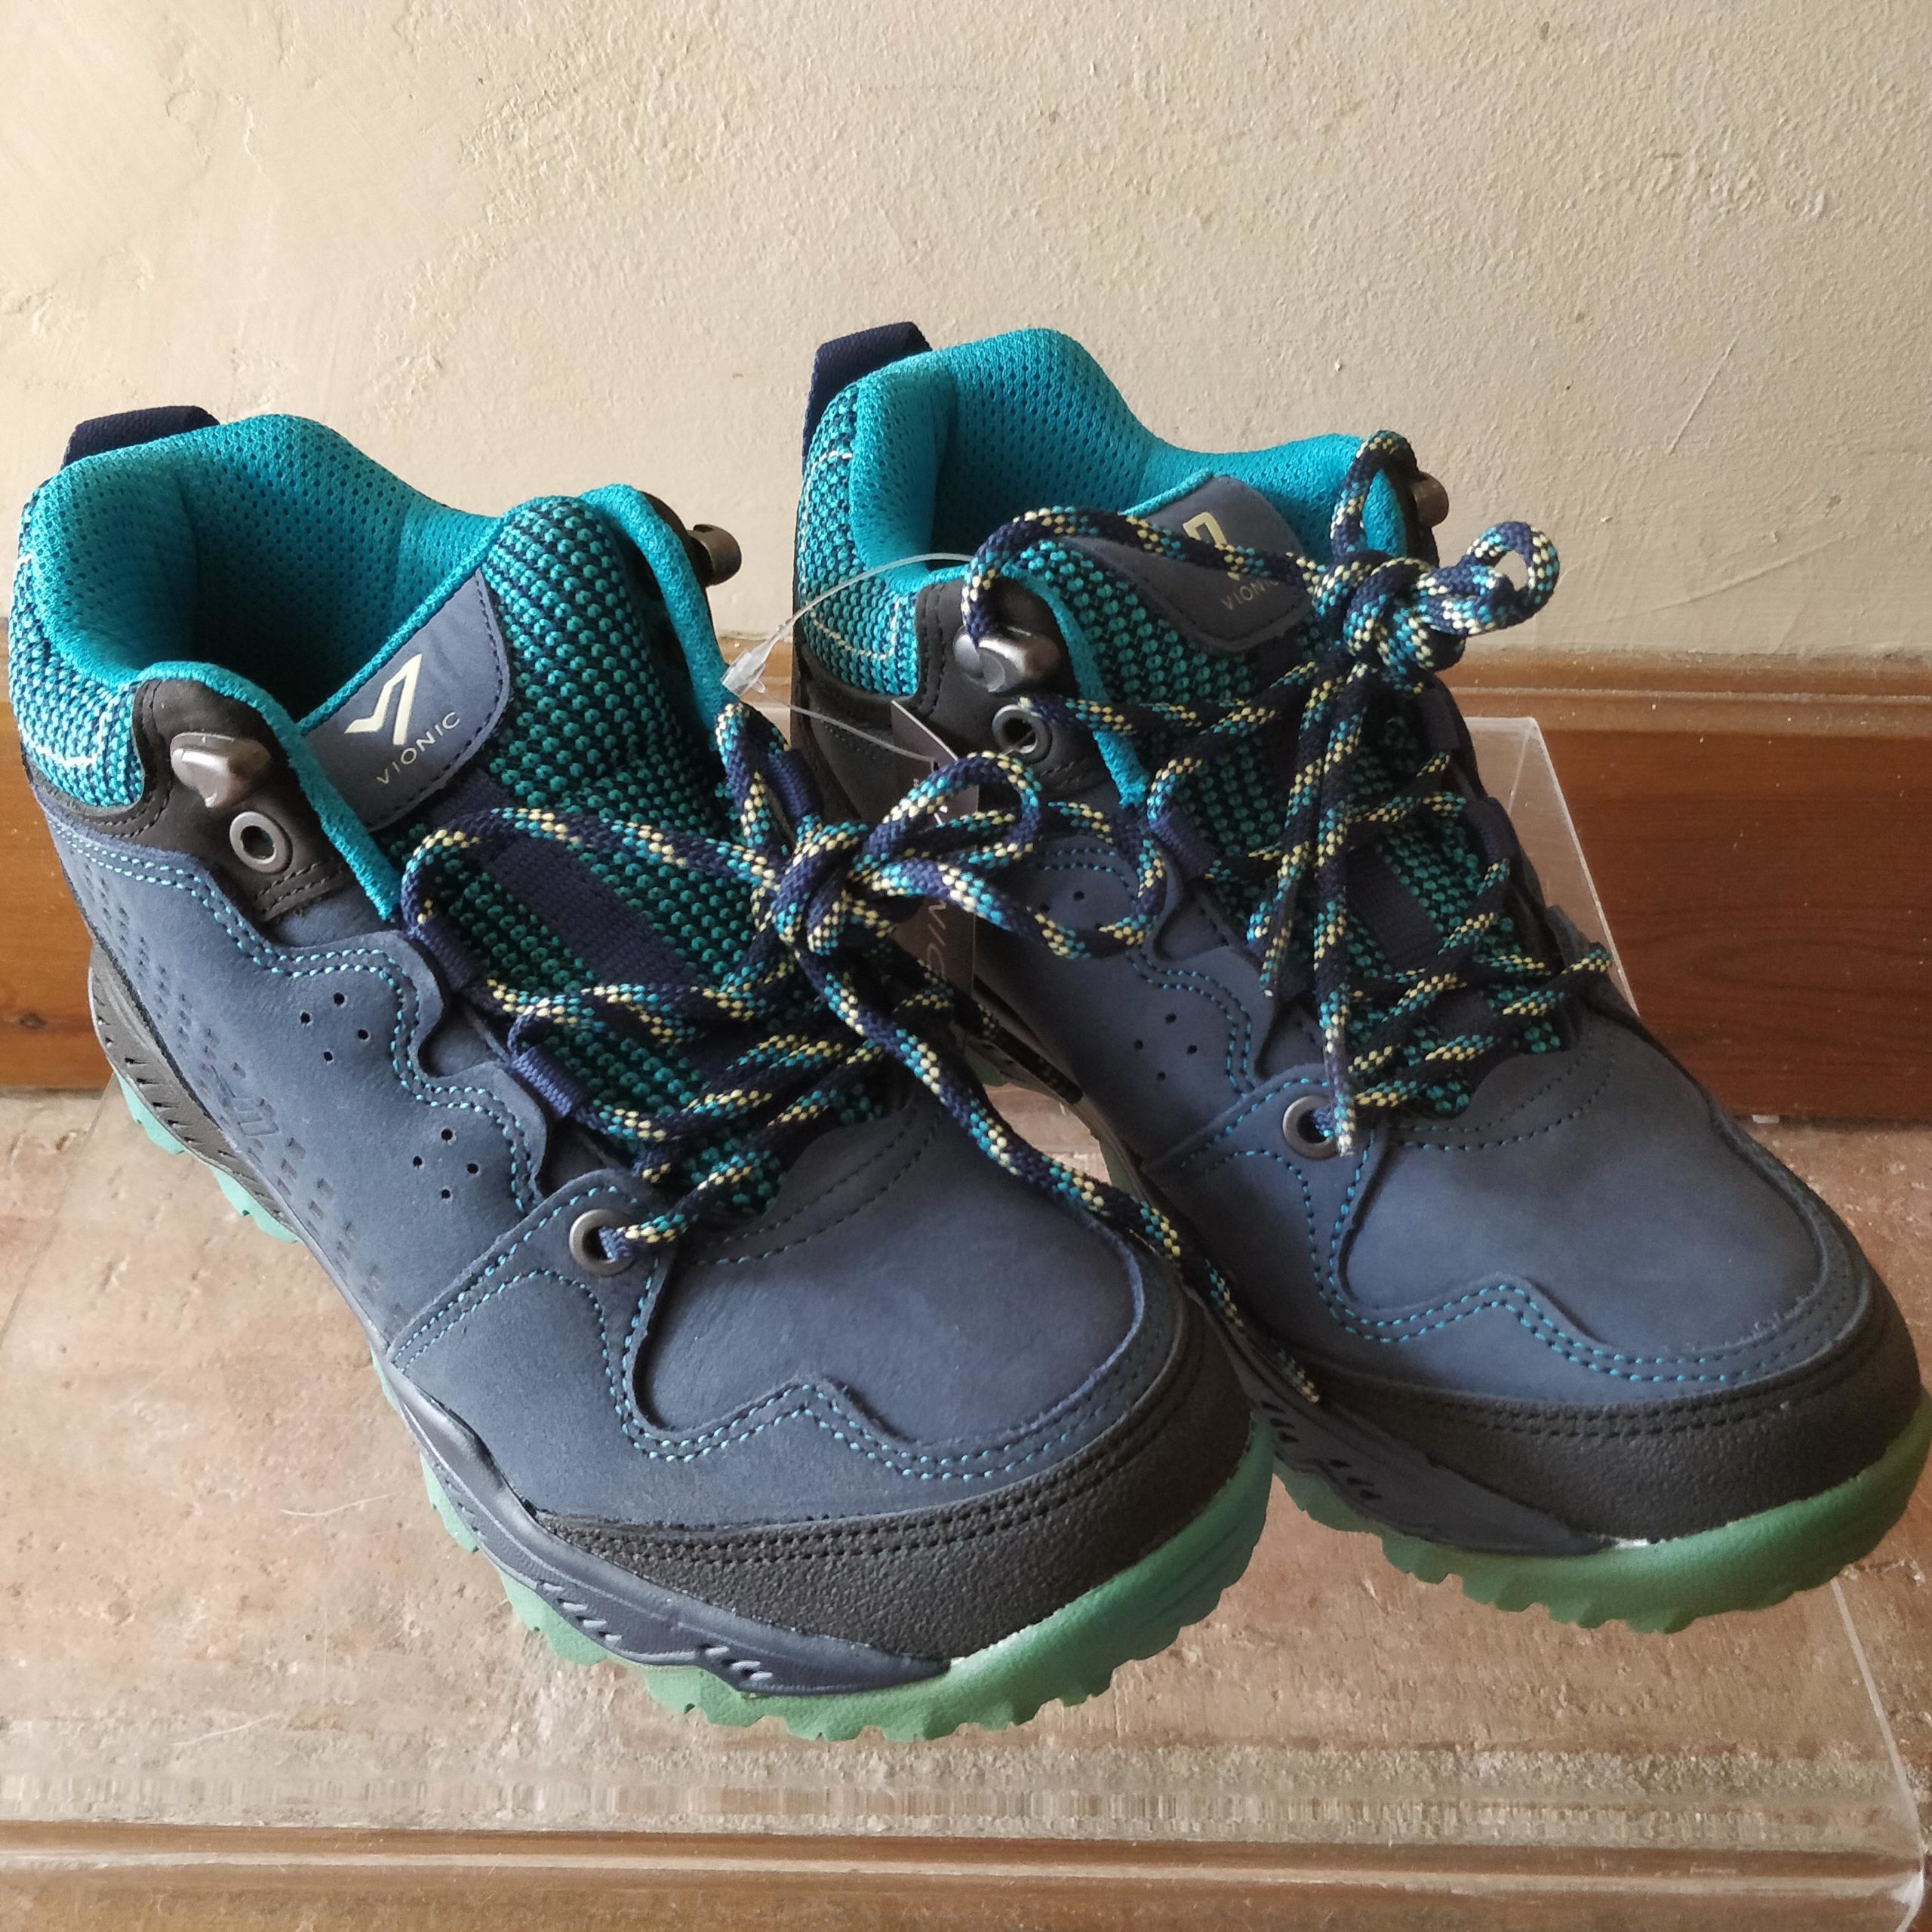 Vionic Everett hiking boots in navy